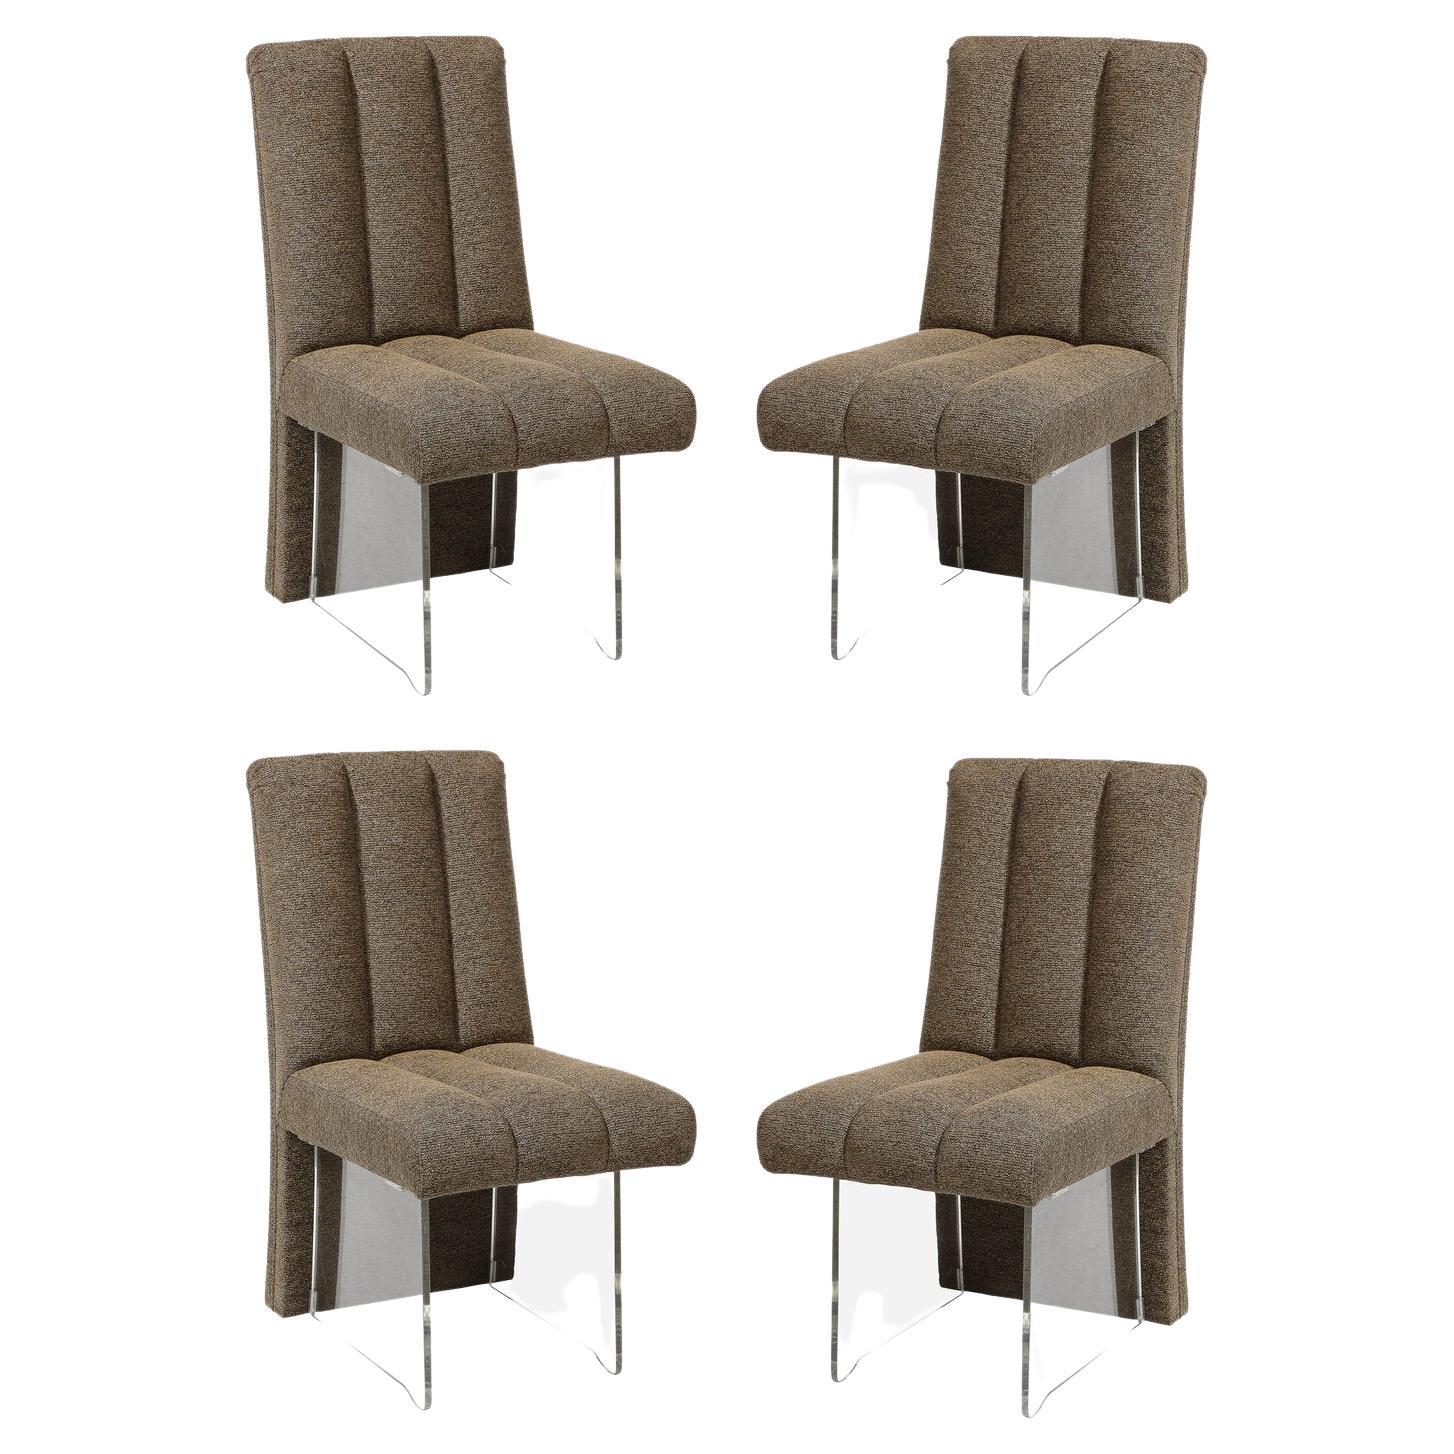 Rare Set of 4 Signed Vladimir Kagan Channeled "Clos" Chairs in Holly Hunt Fabric For Sale